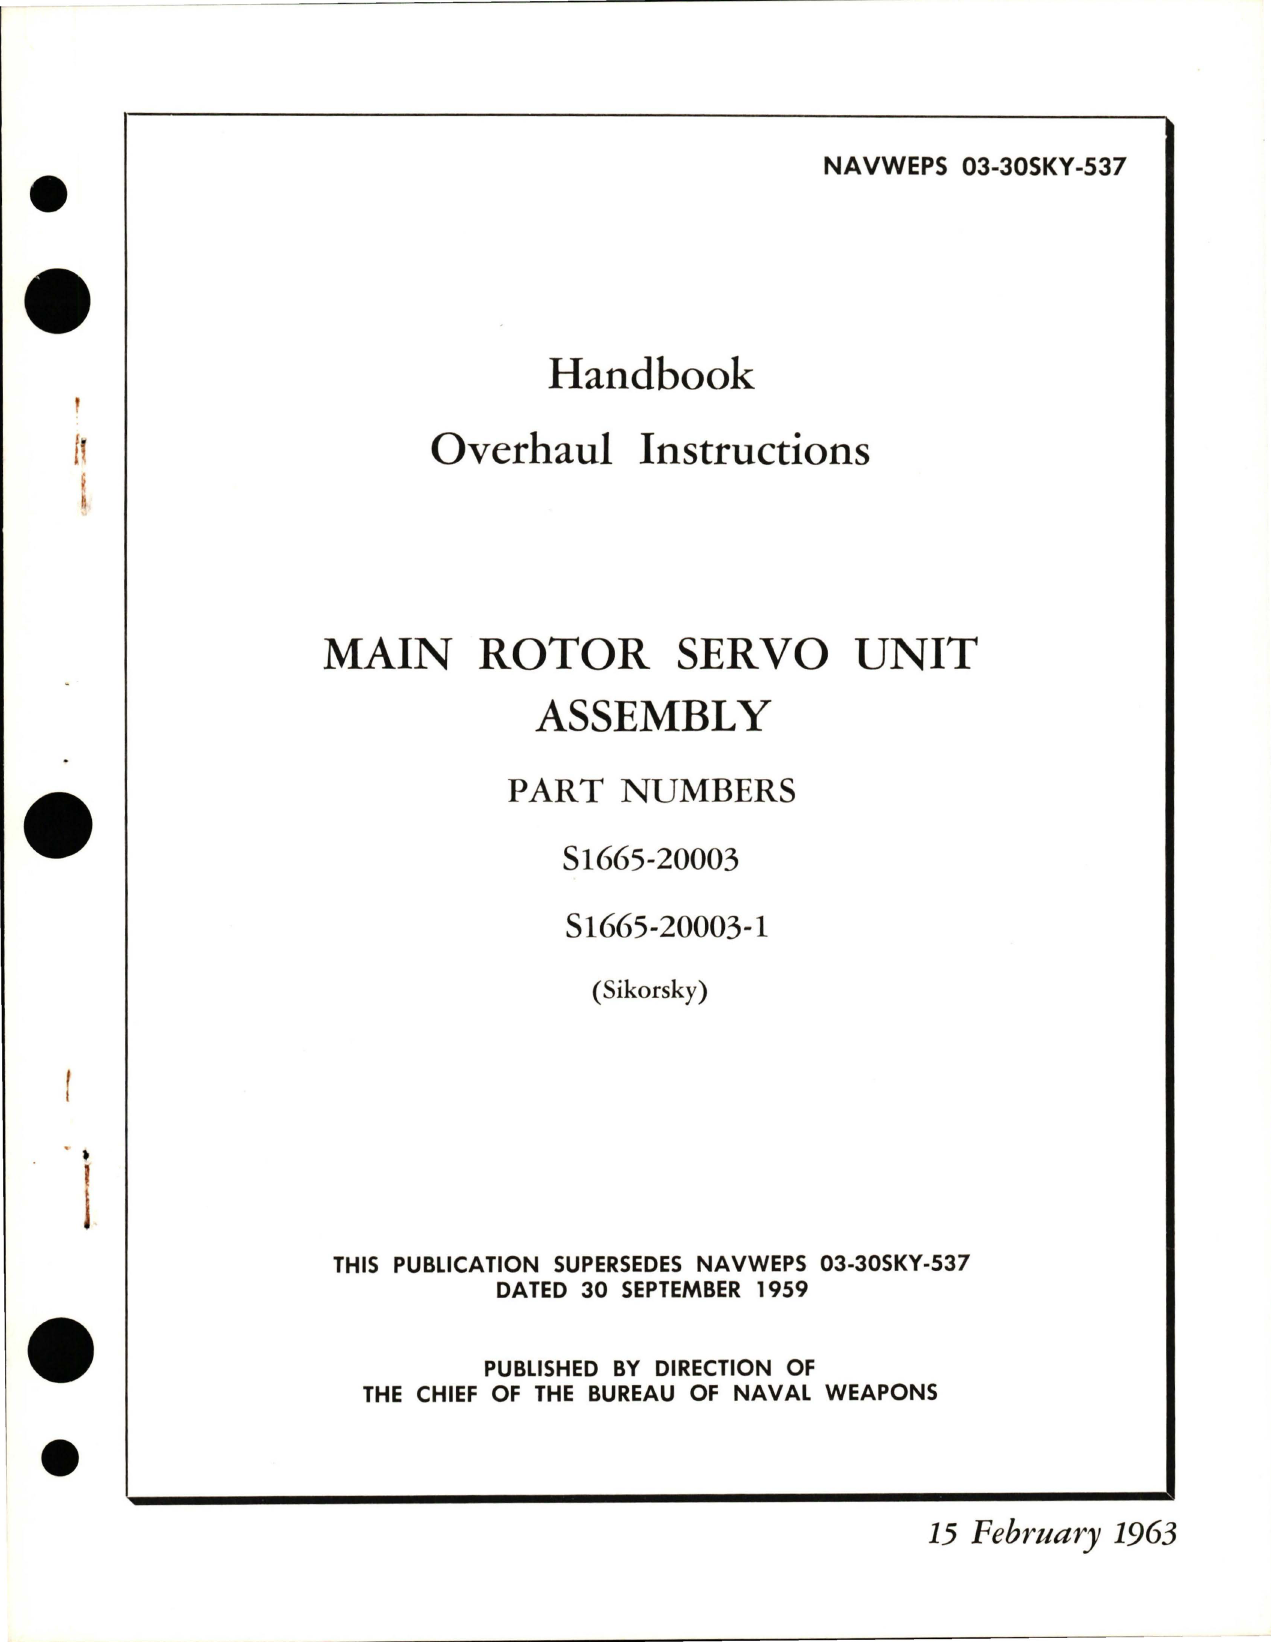 Sample page 1 from AirCorps Library document: Overhaul Instructions for Motor Rotor Servo Unit Assembly - Parts S1665-20003 and S1665-20003-1